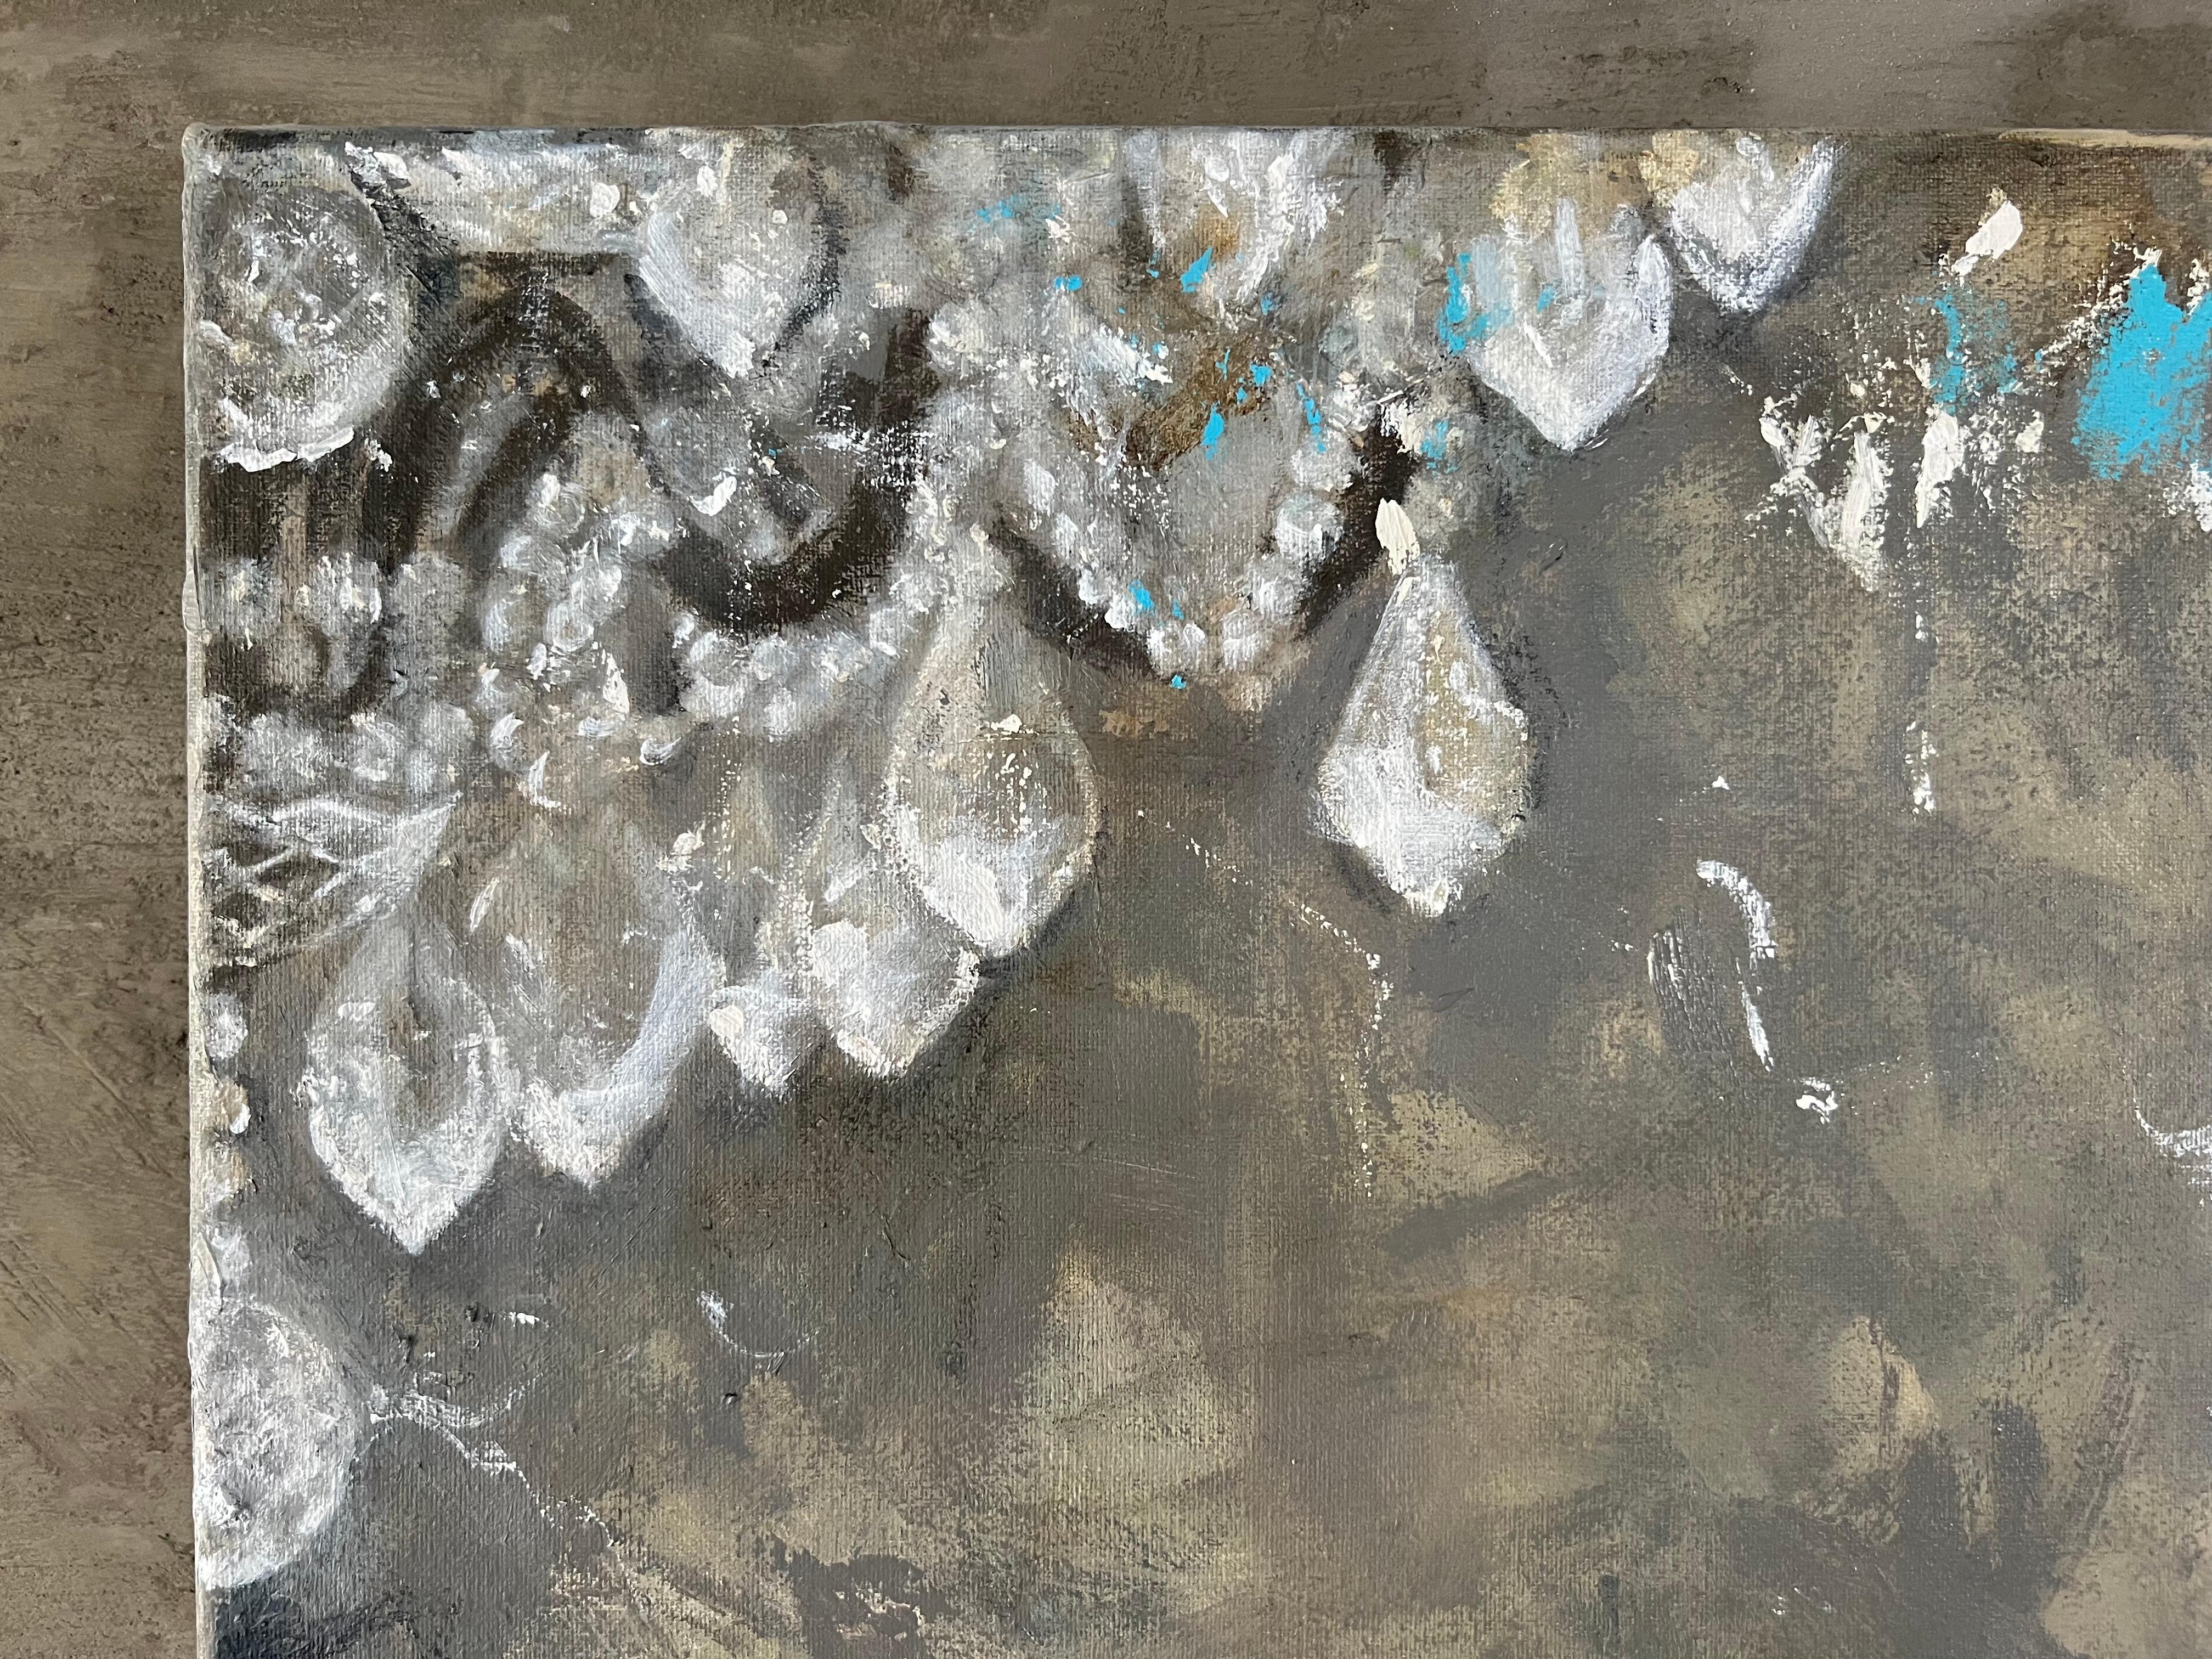 This is an impressionistic style chandelier painting combining delicate detail with intuitive abstract brush work. Tonal layers build up a textured surface evoking visual movement, and form small paintings within the larger canvas. The blend of